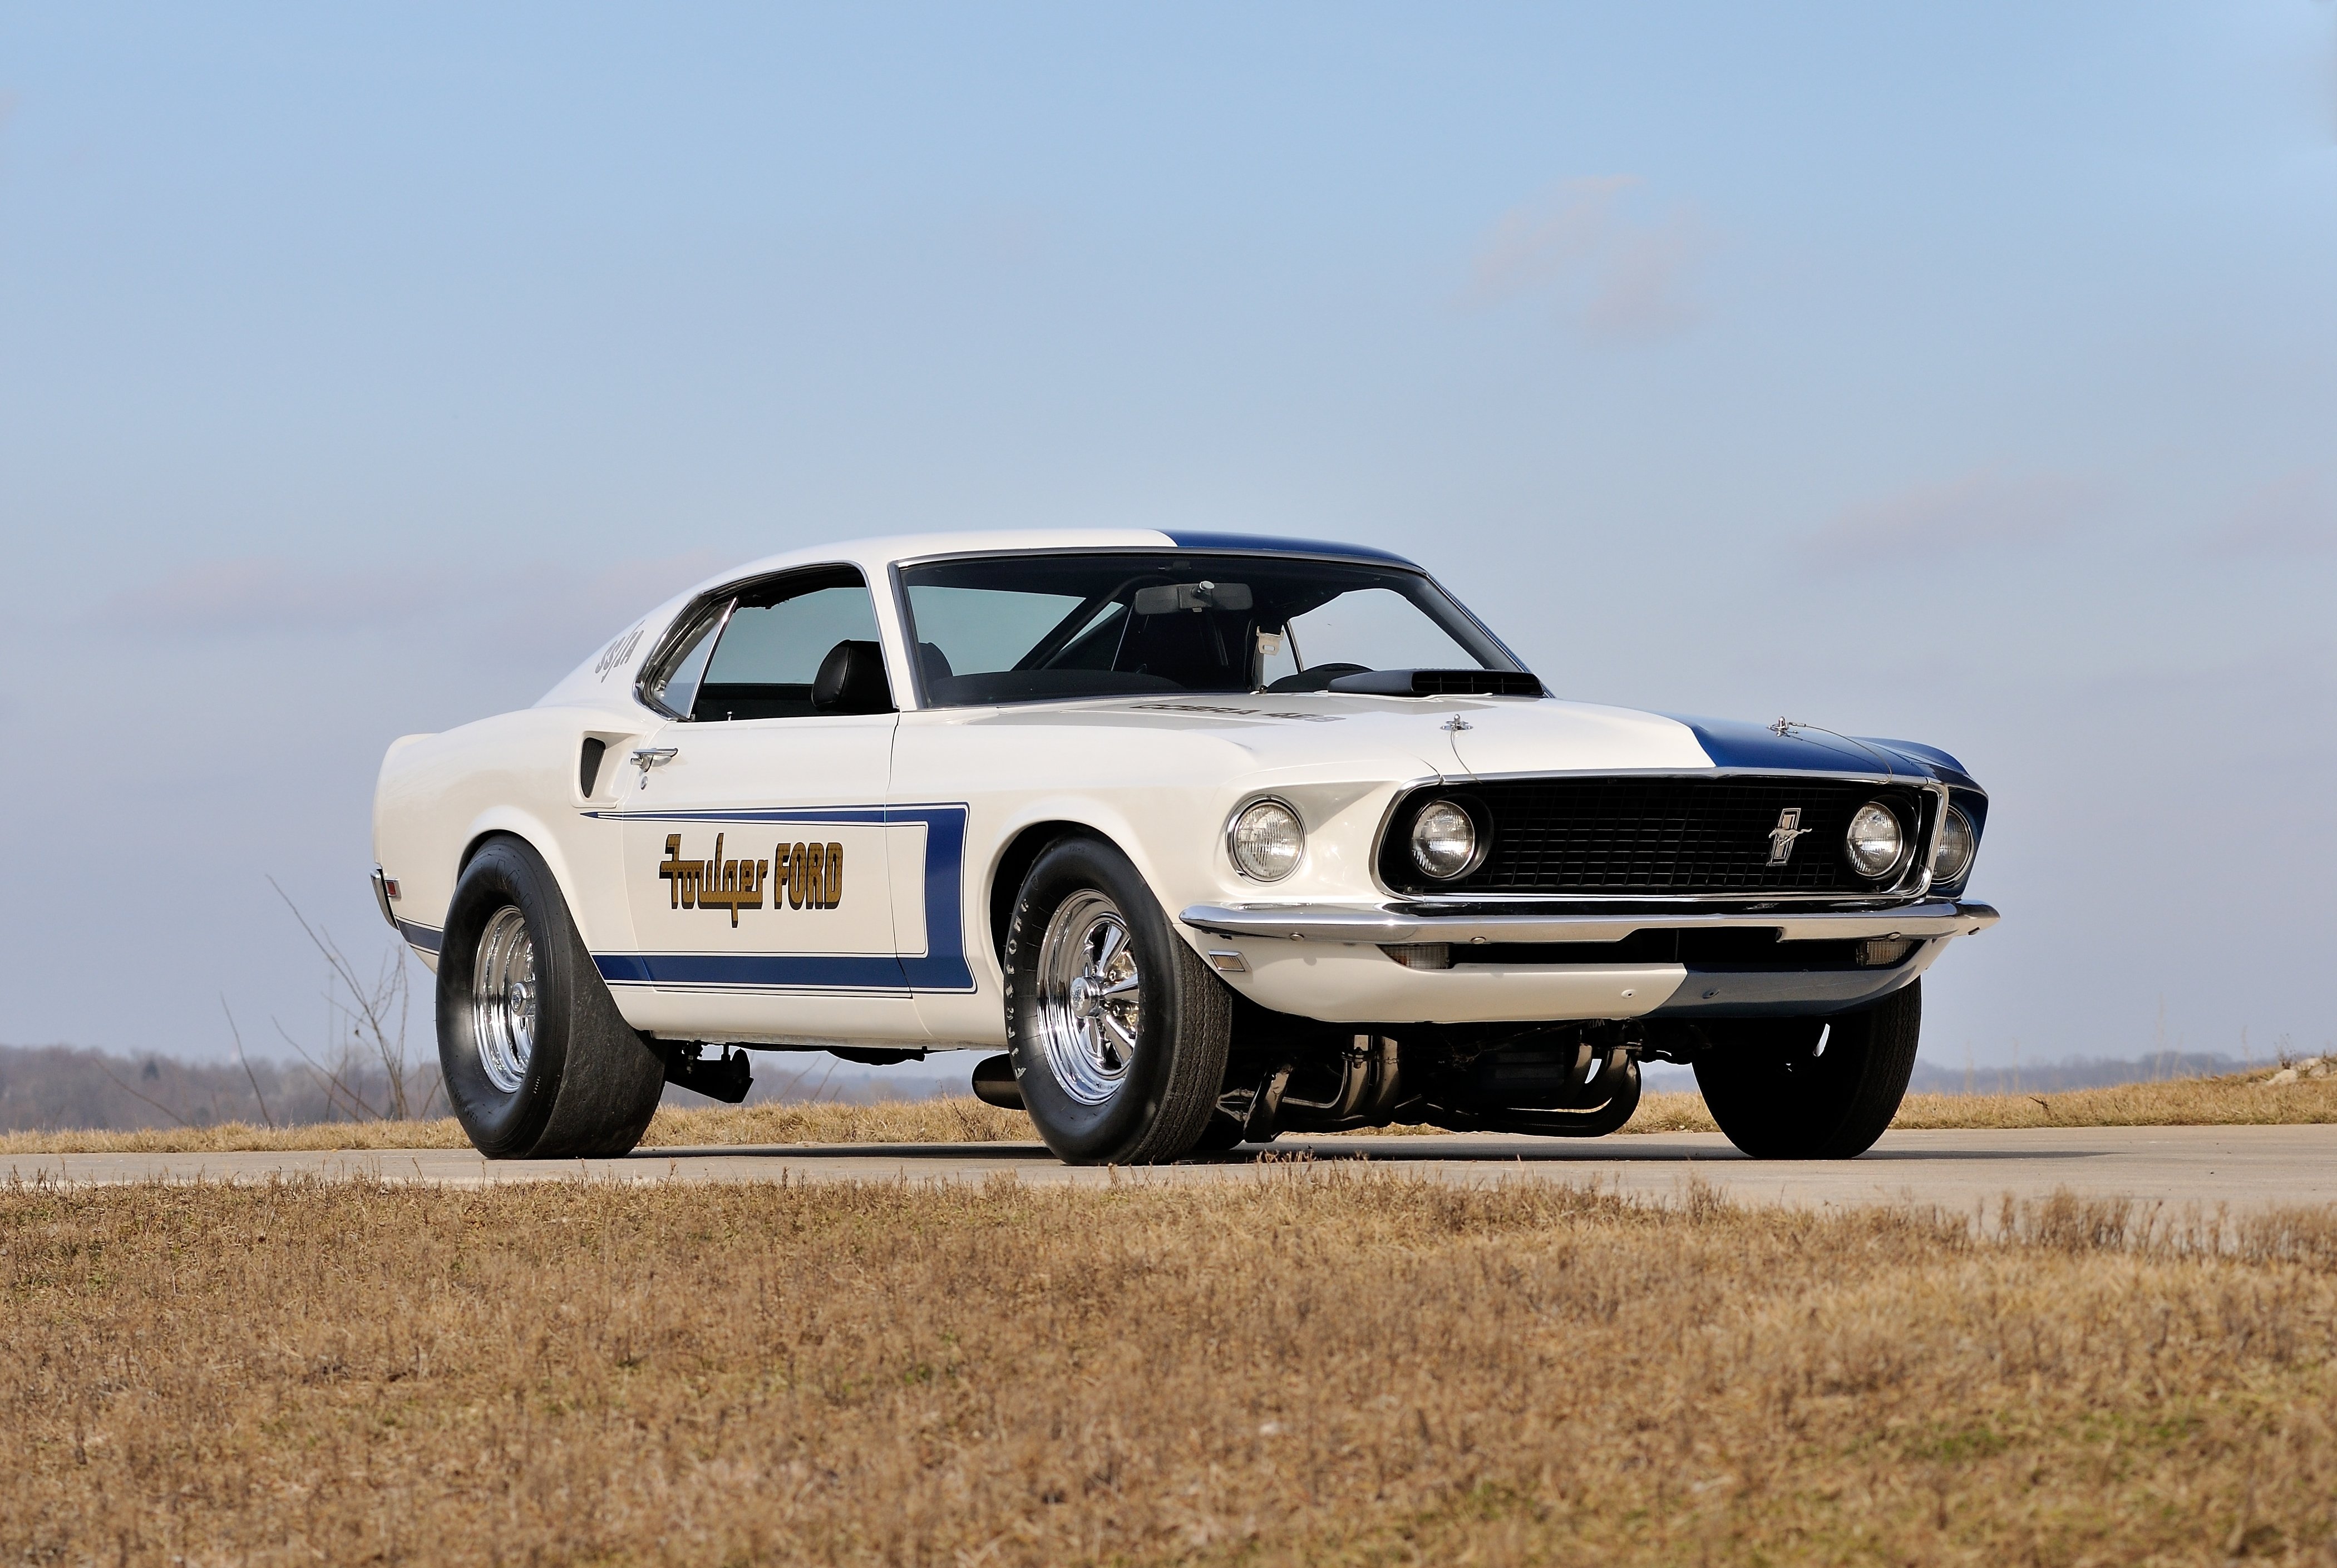 1969, Ford, Mustang, Cj, Dragster, Drag, Pro, Stock, Race, Usa, 4200x2800 01 Wallpaper